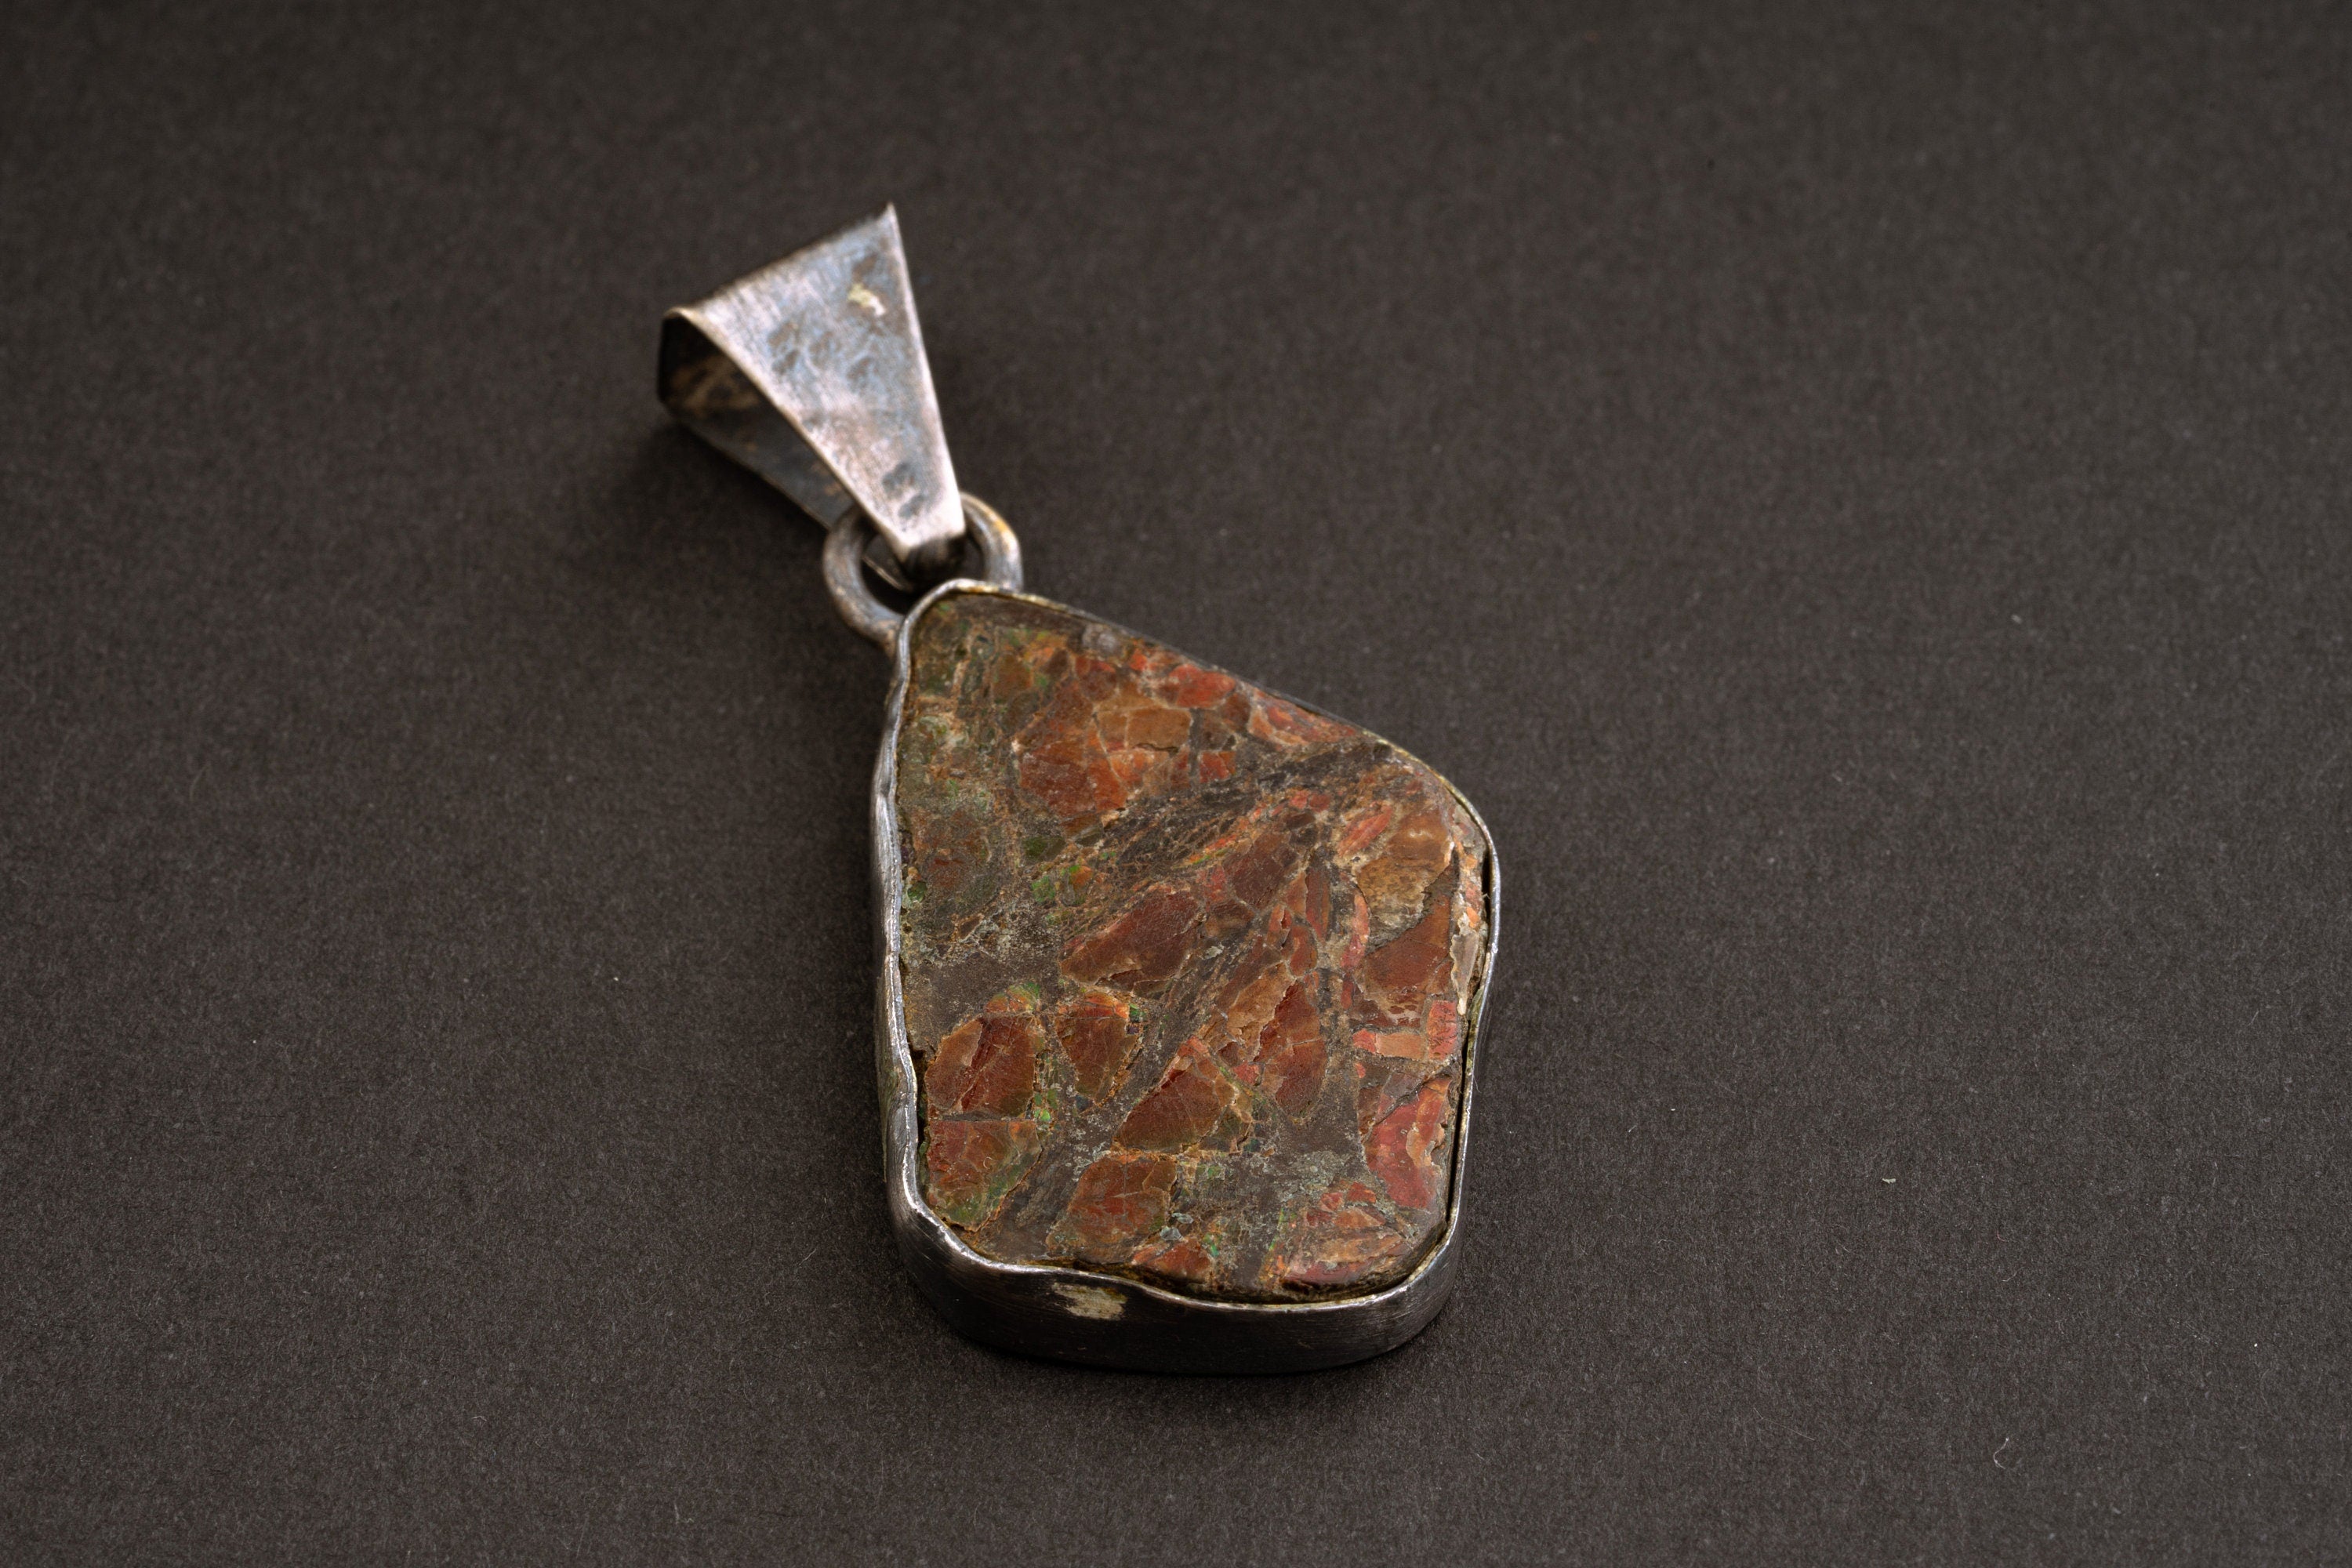 Opalized fossilised ammonite - Natural Opal - Textured 925 Silver Setting - Crystal Pendant Neckpiece